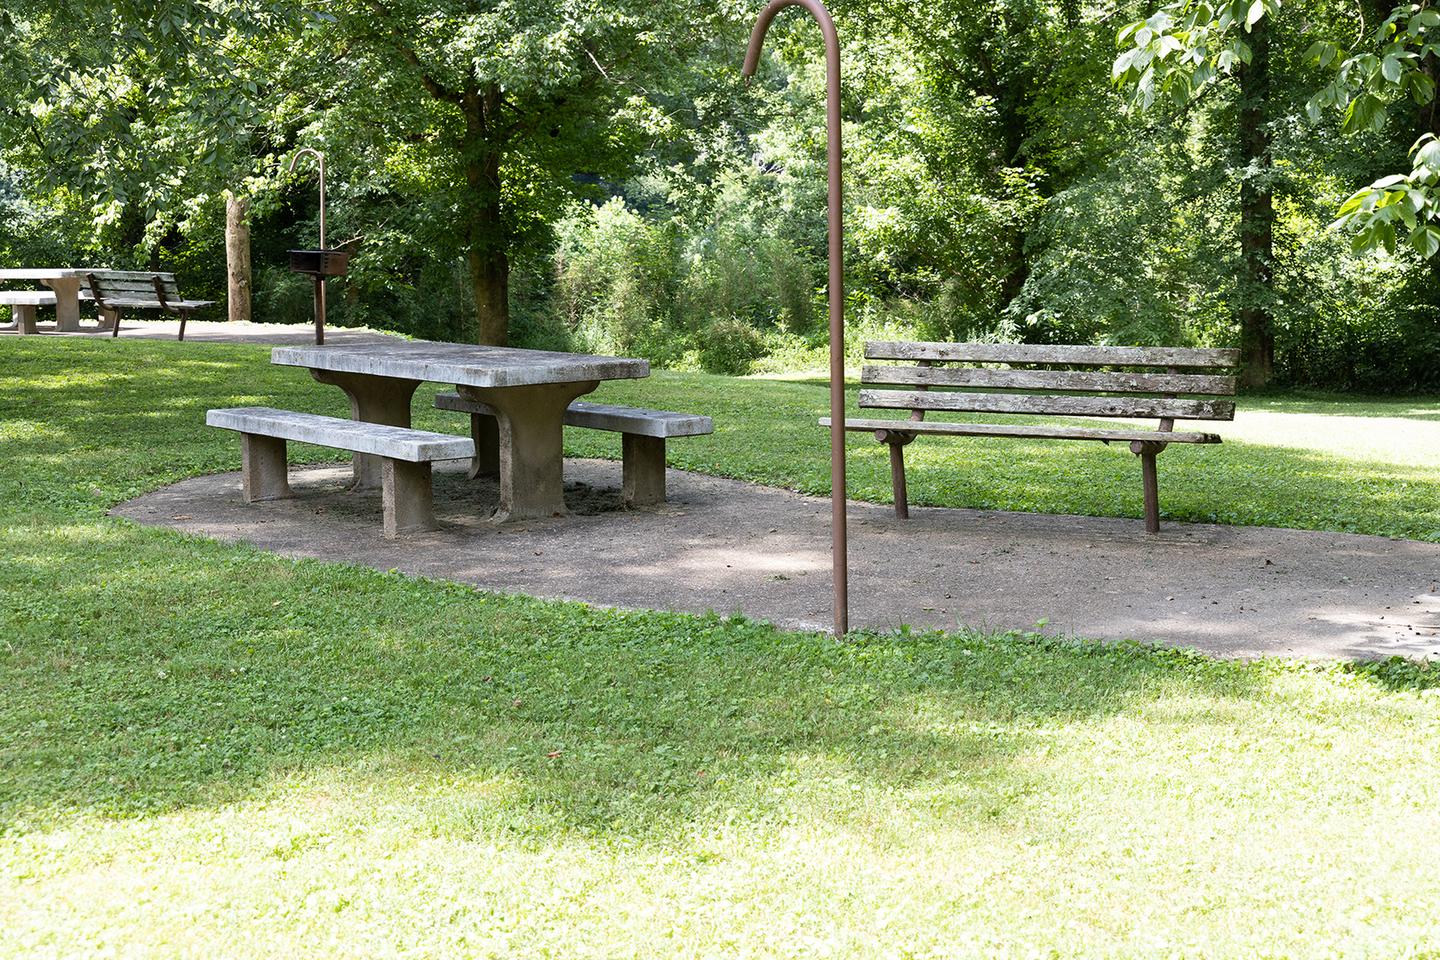 Bench and picnic table Picnic table and bench for visitor enjoyment and view of the river.